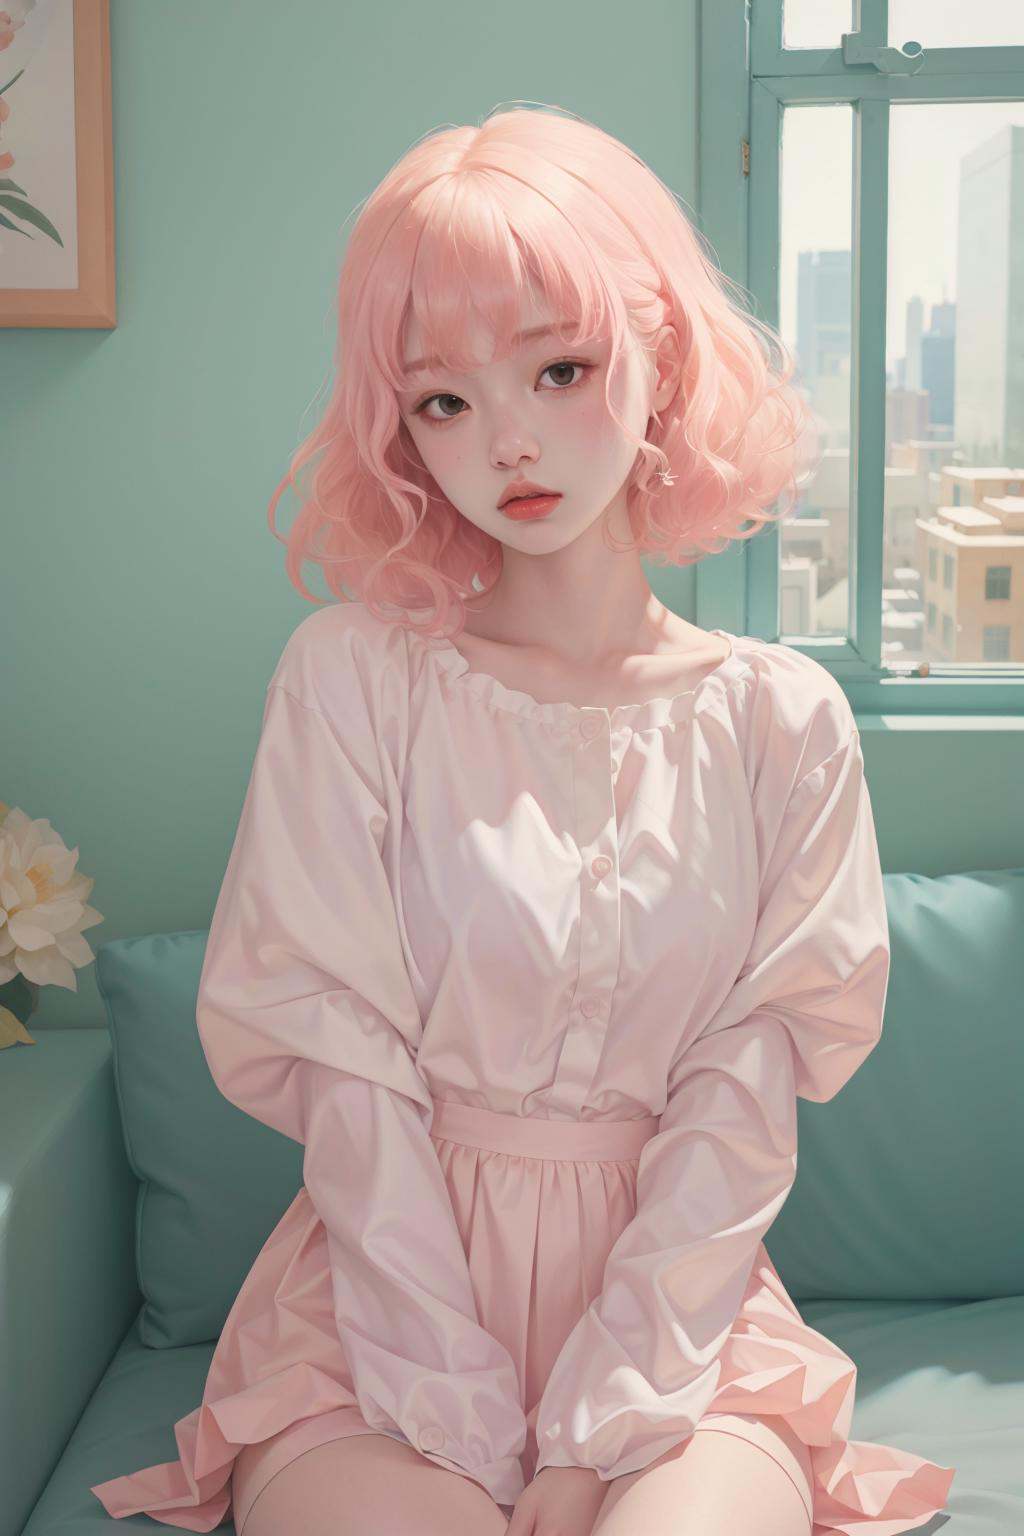 masterpiece,best quality,<lora:FHHY-06:0.8>,fenhong,1 girl,pink,pink hair,room,